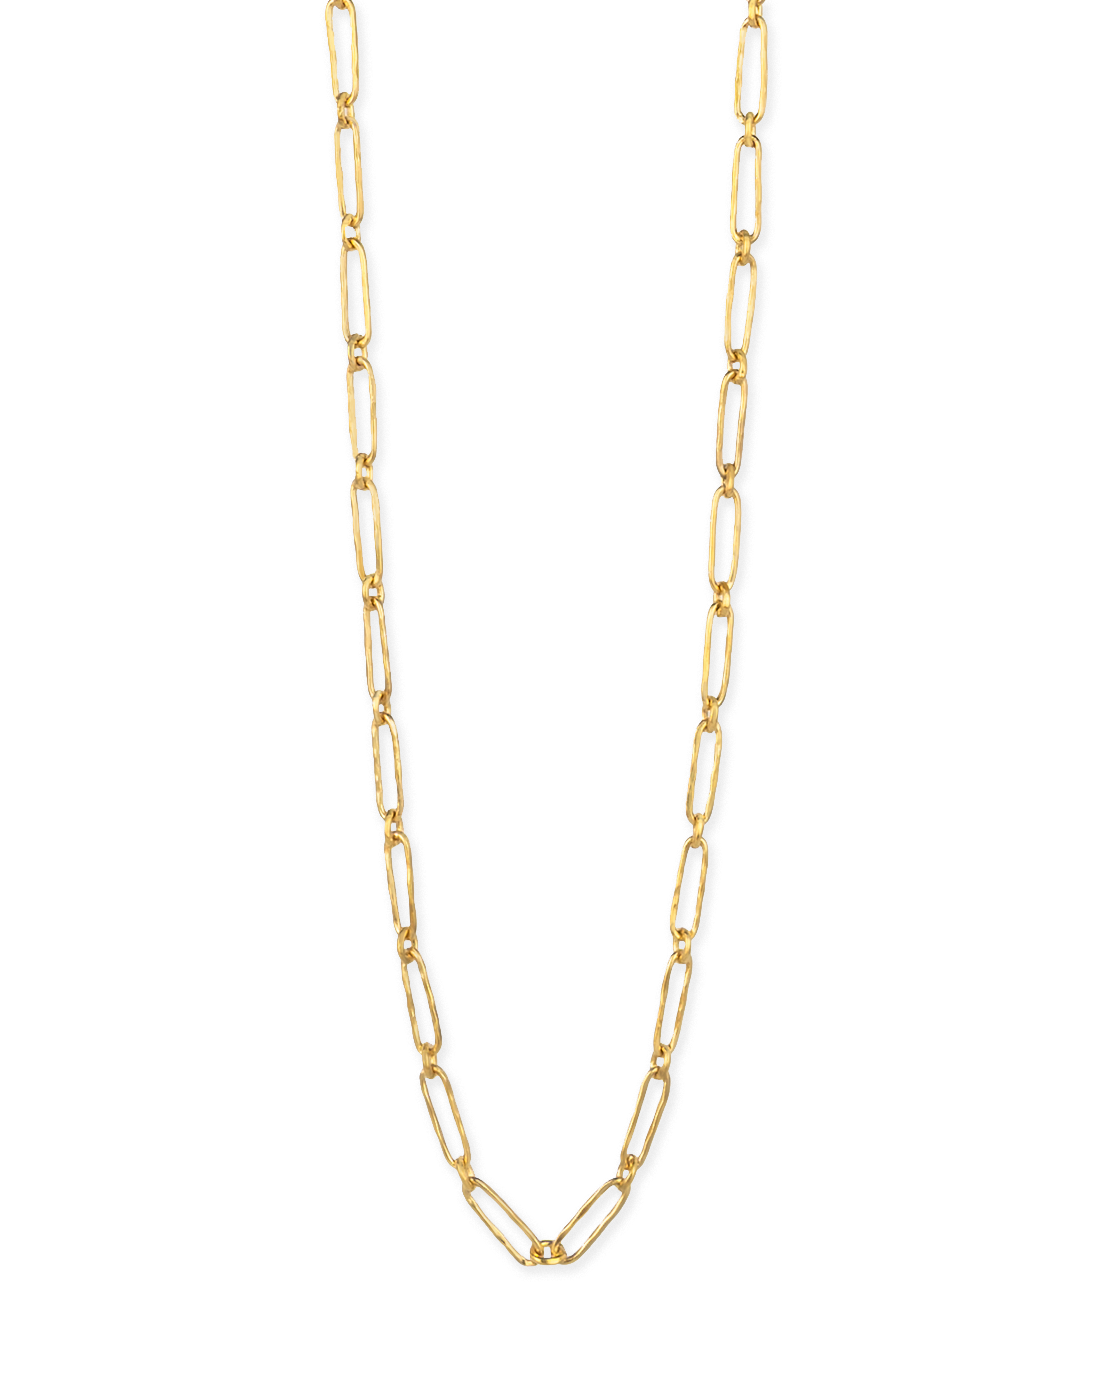 OVAL TO ROUND LINK NECKLACE IN GOLD